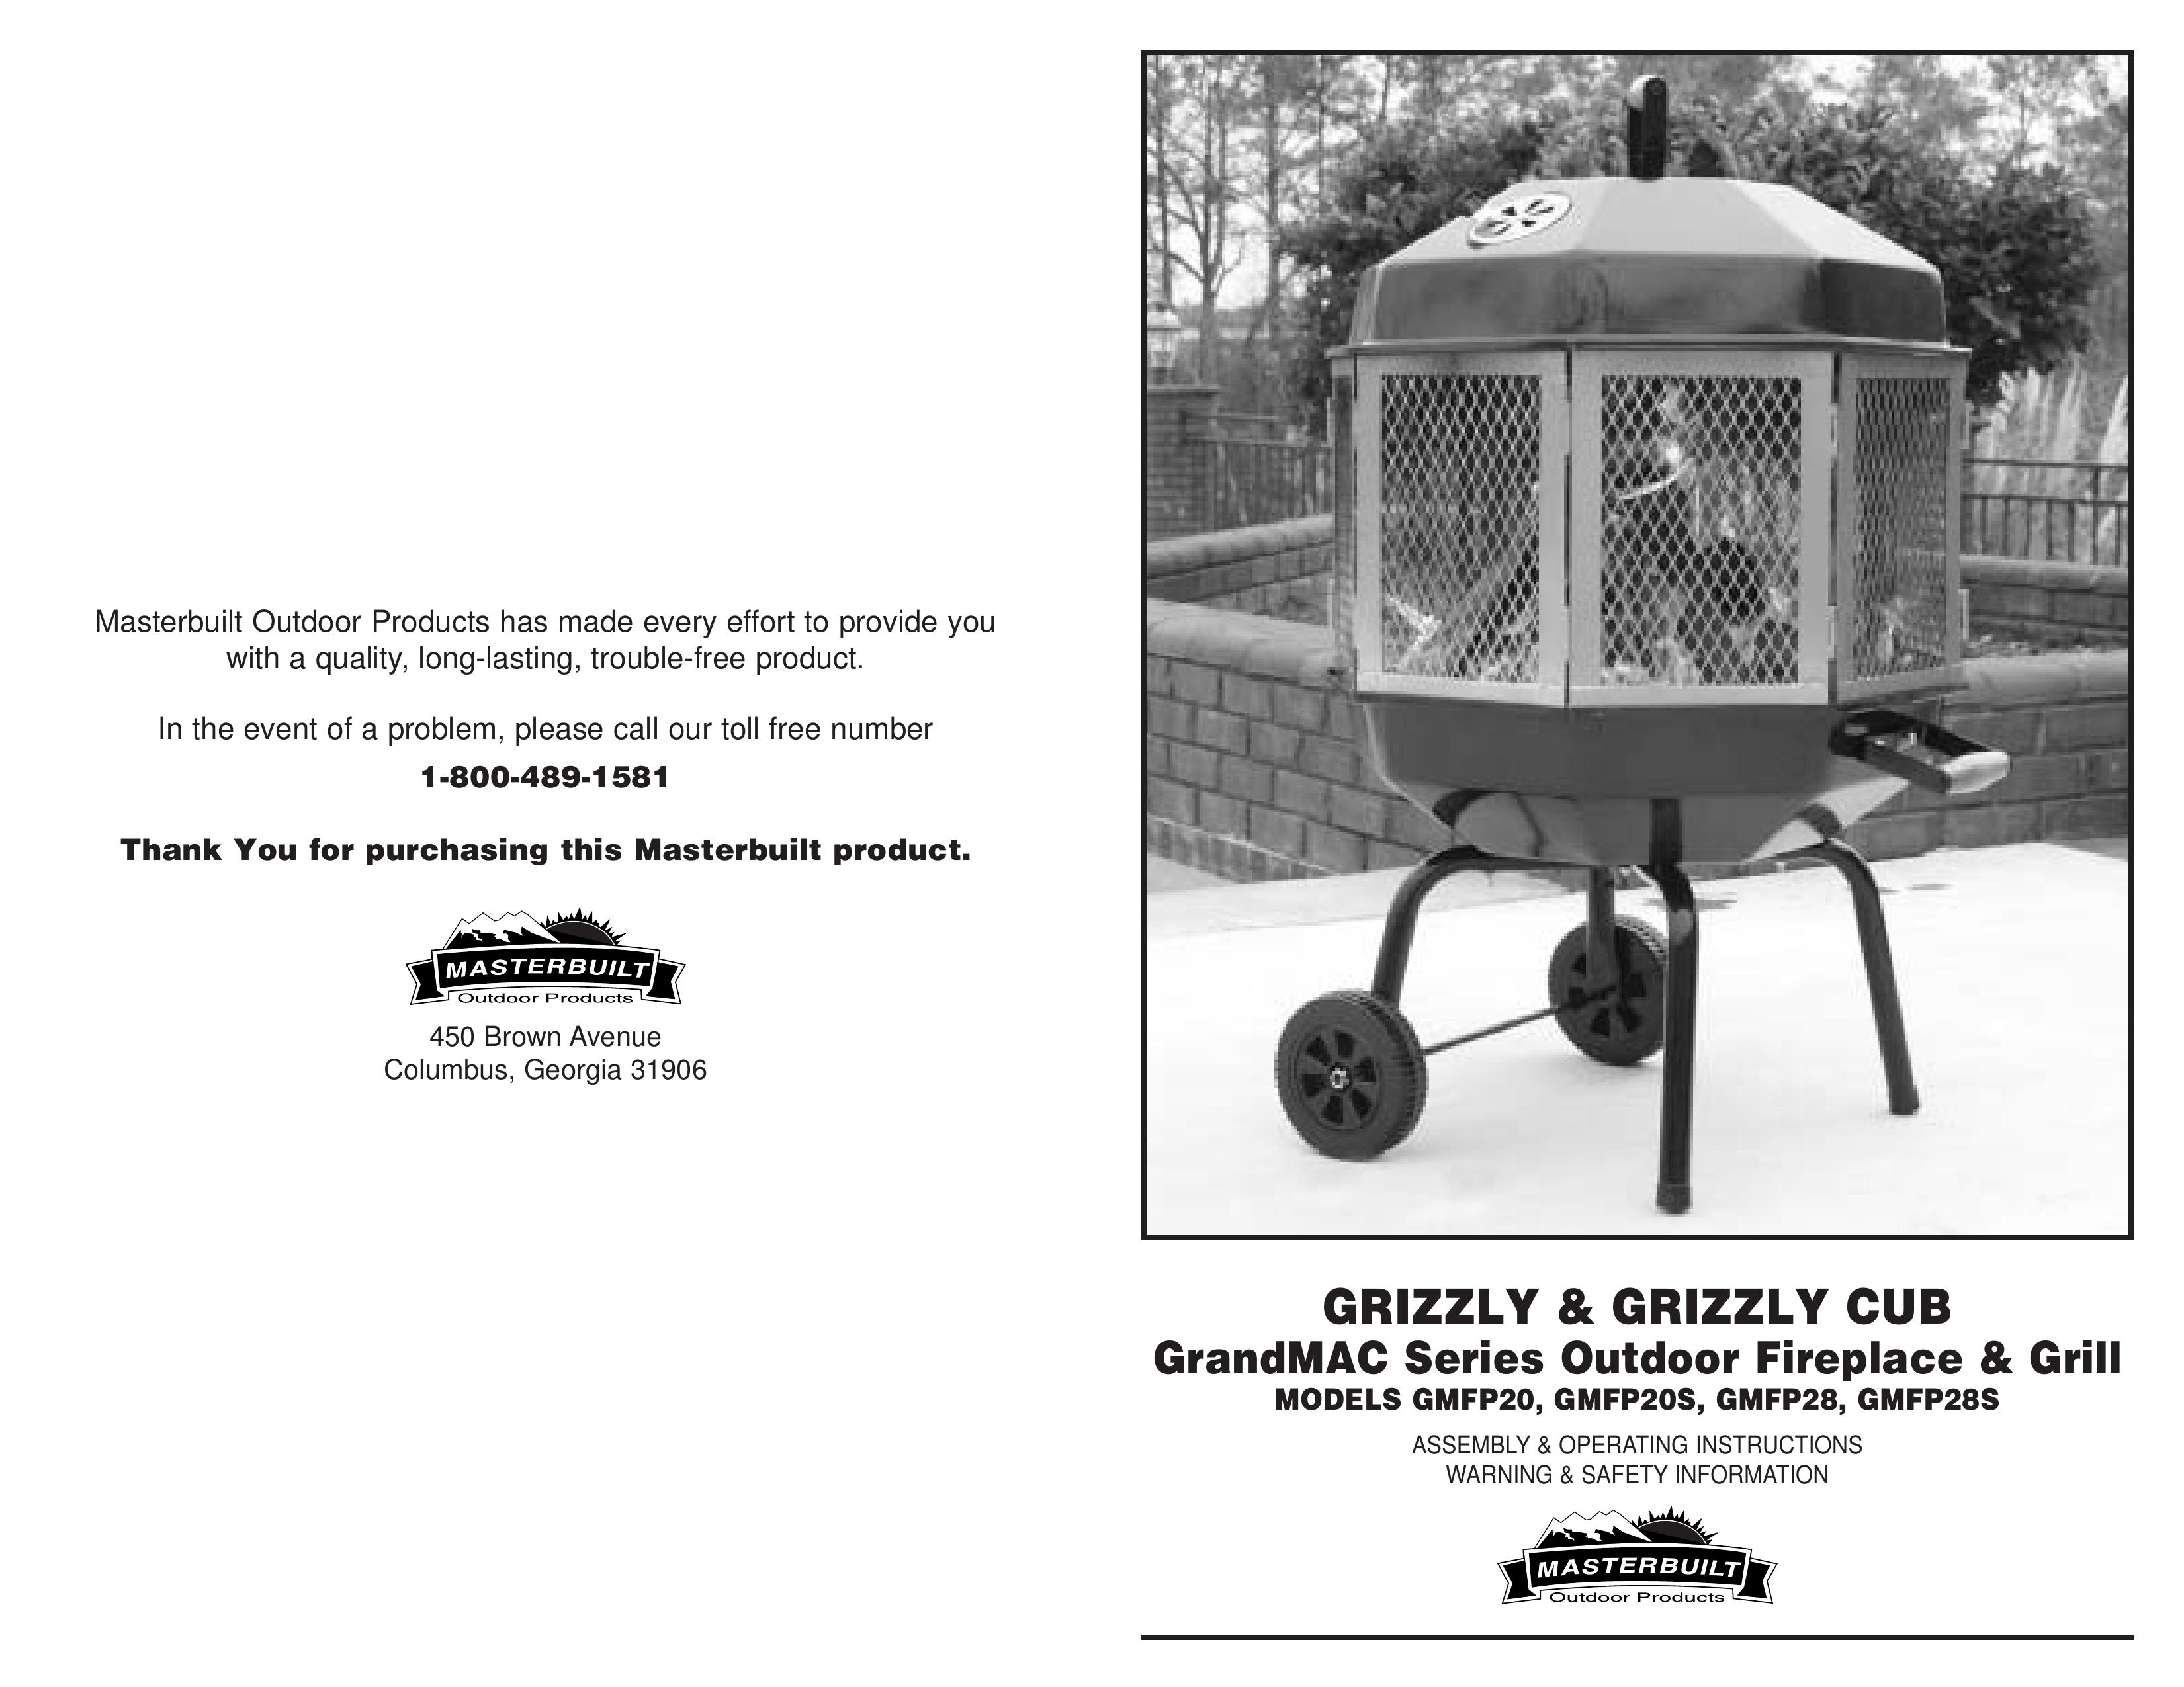 Grizzly GMFP28S Outdoor Fireplace User Manual